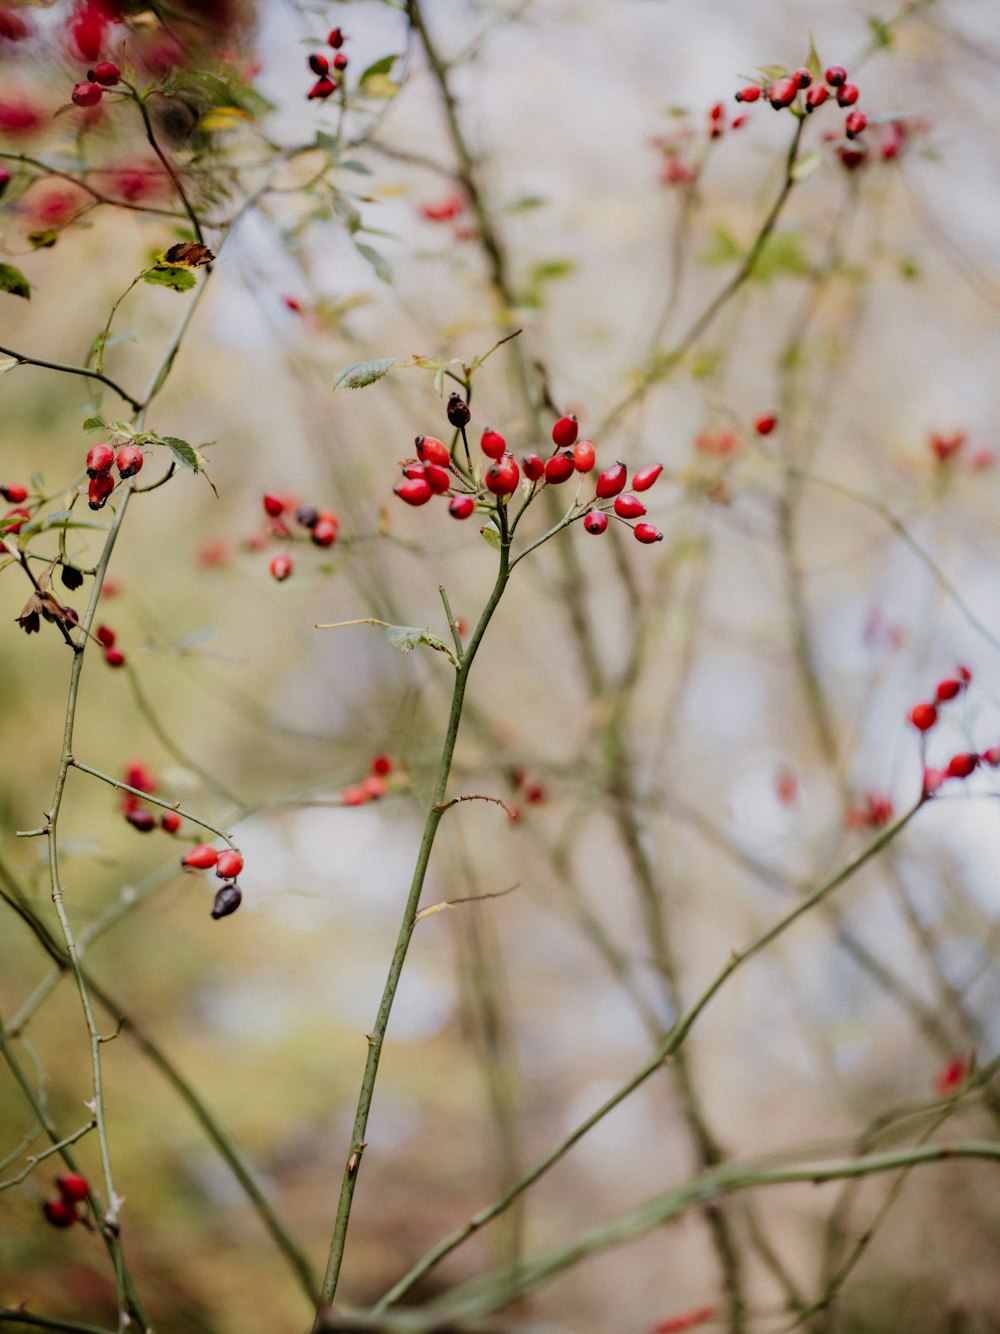 a close up of a tree with red berries